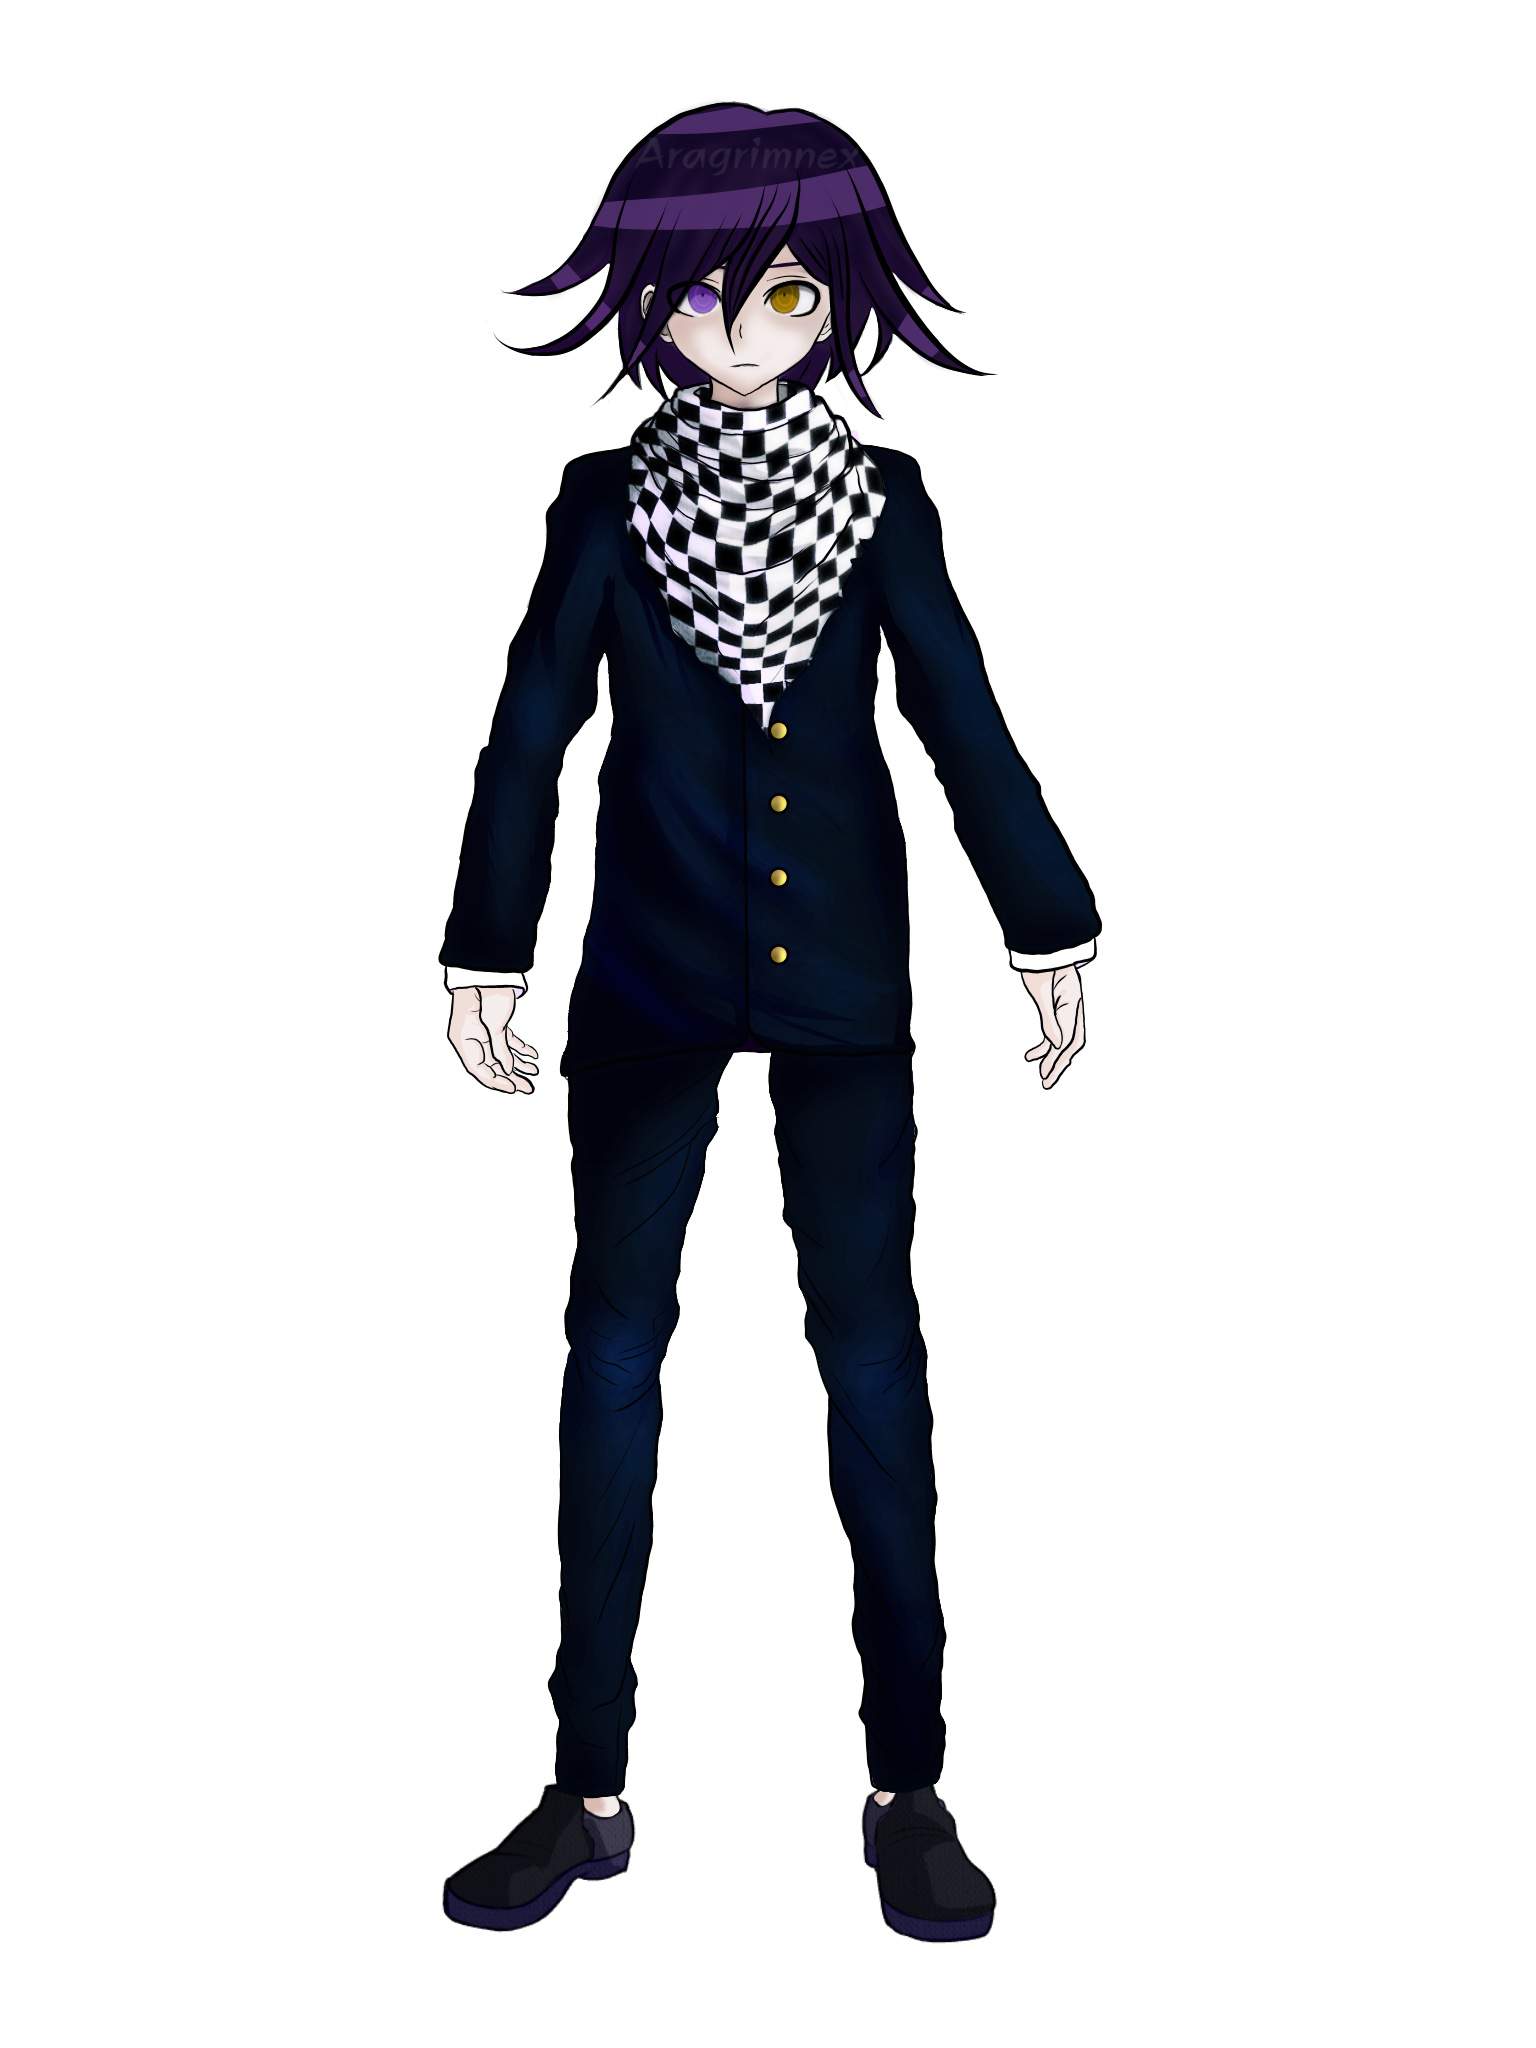 Pregame Kokichi Ouma Sprite Edit Danganronpa Amino Watch in hd☆inspired to make this by my good friends lolcharacters we chose were based off some of our favorite shipsenjoy !!!audio. amino apps